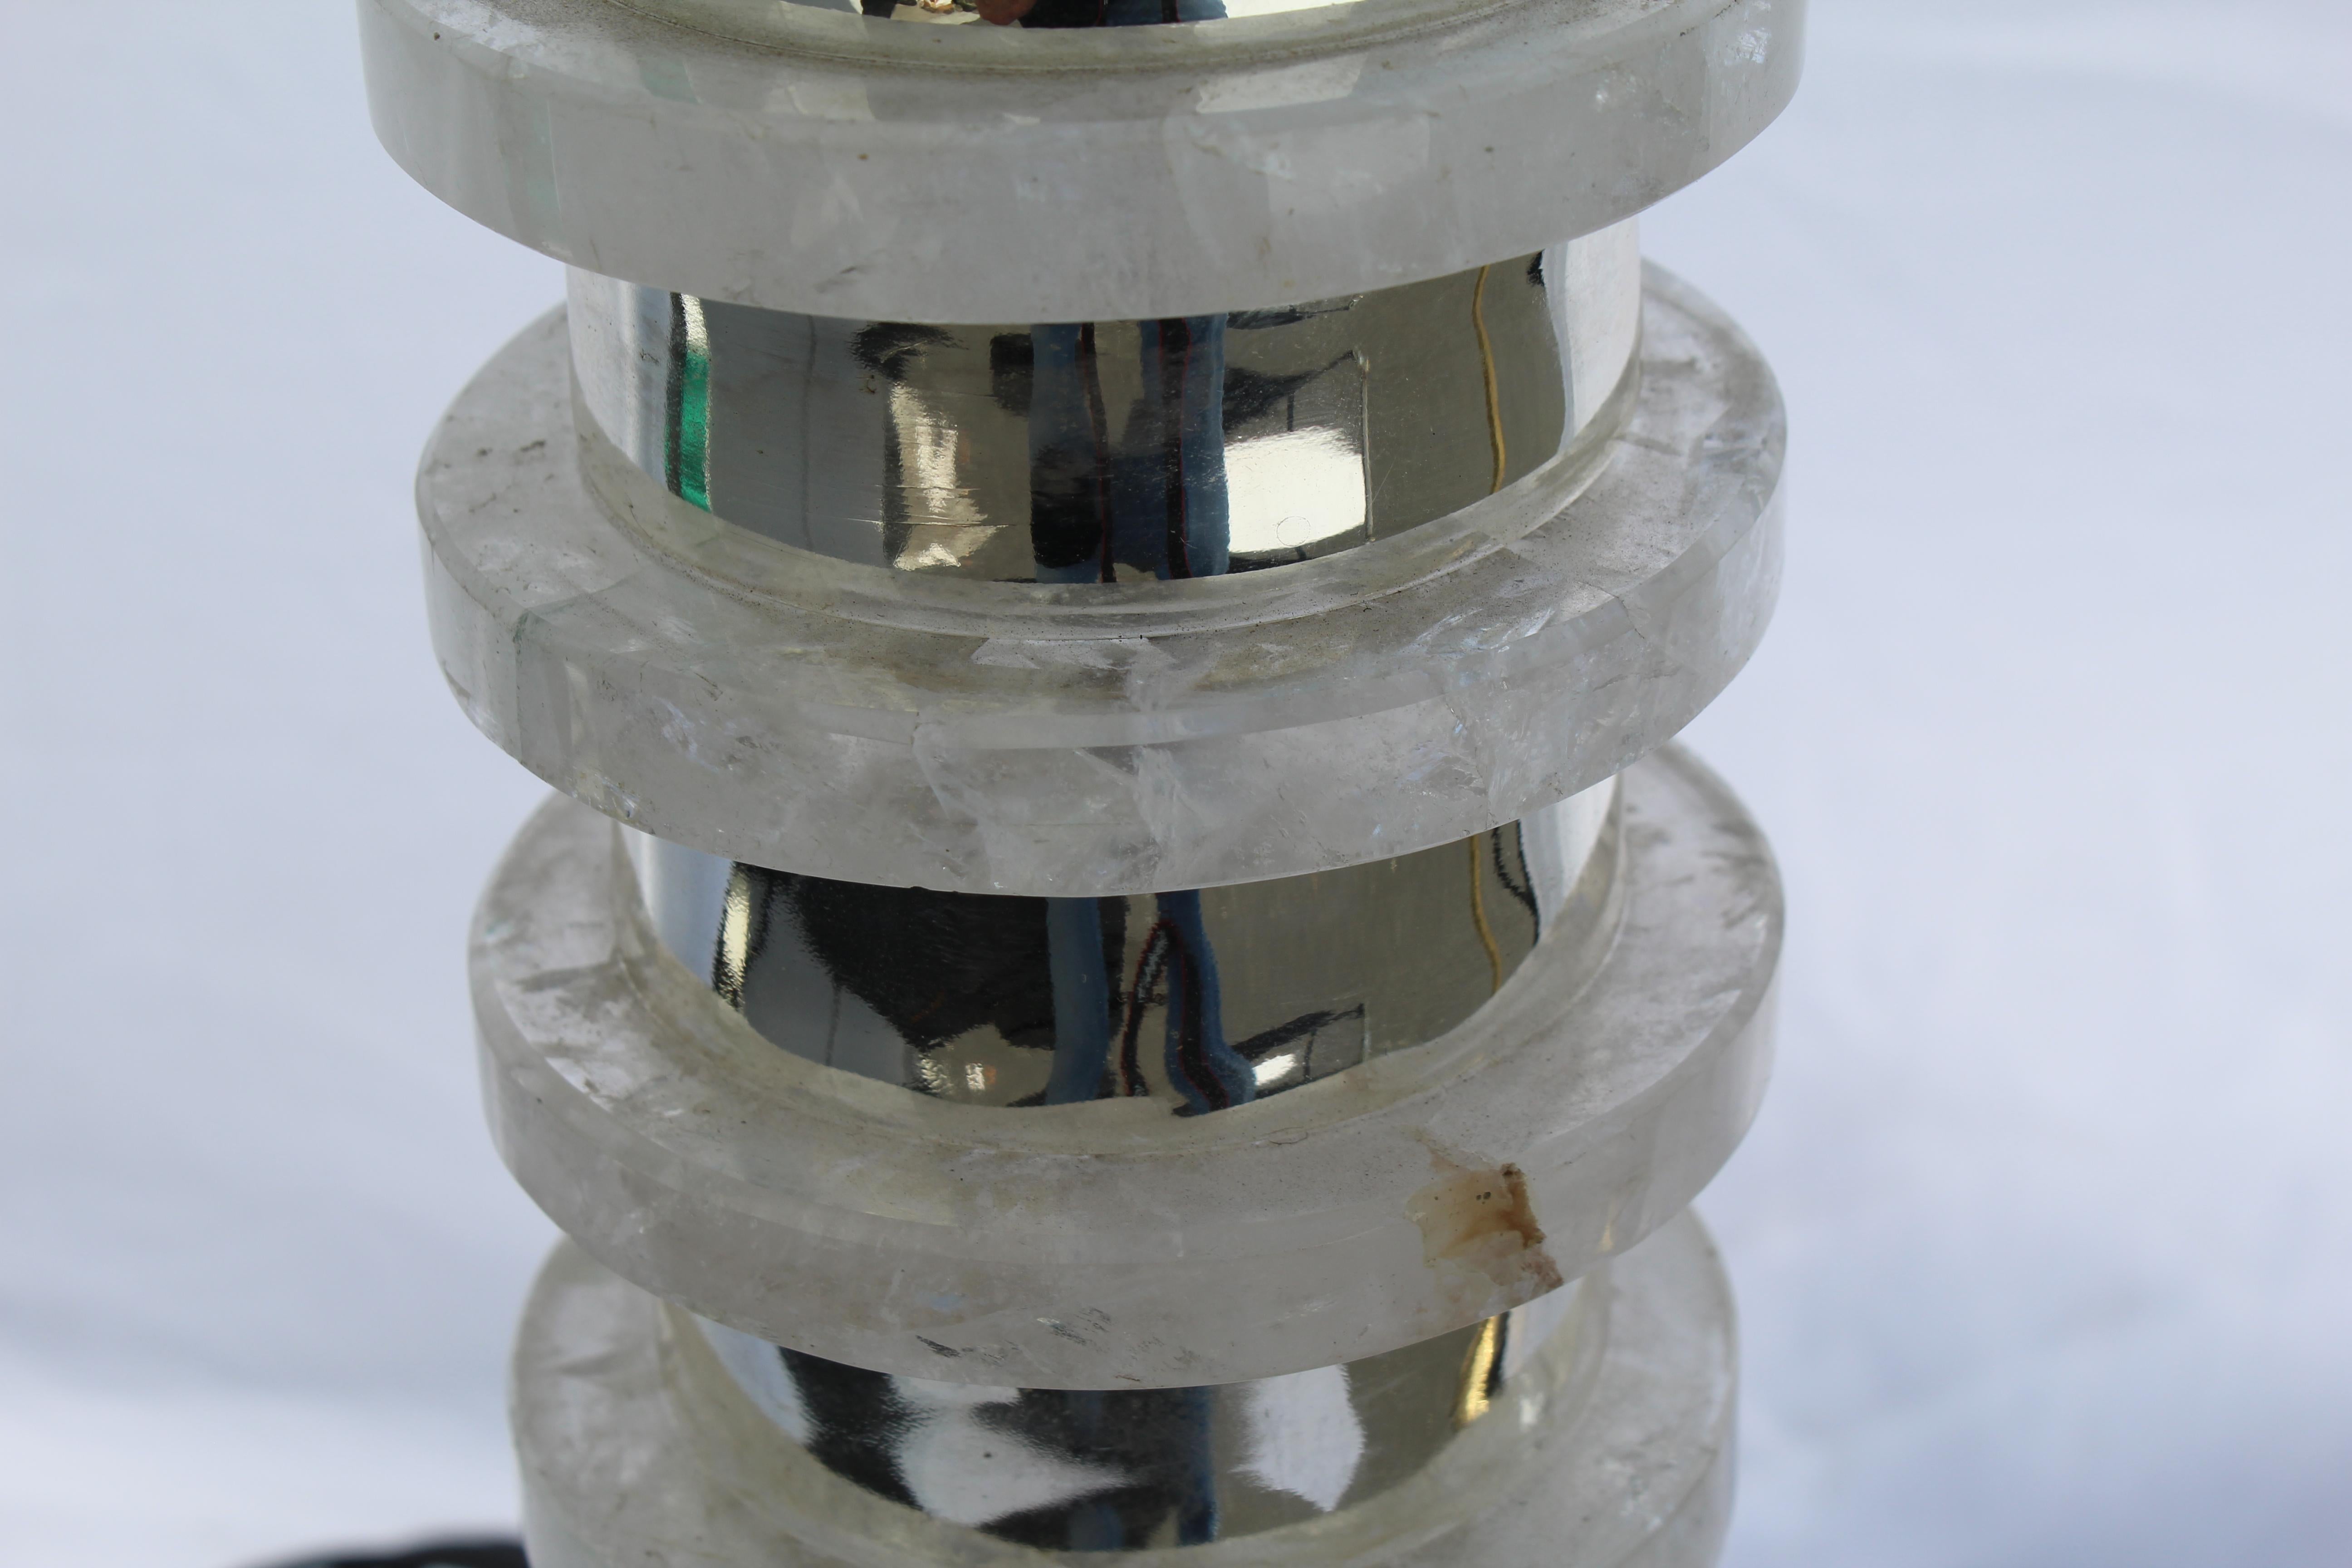 A Deco /Modern lamp made with stacked rock crystal disc made in Brazil. Each disc separated by a Hi-polished nickel metal spacer. All together and mounted on an absolute black marble base 6